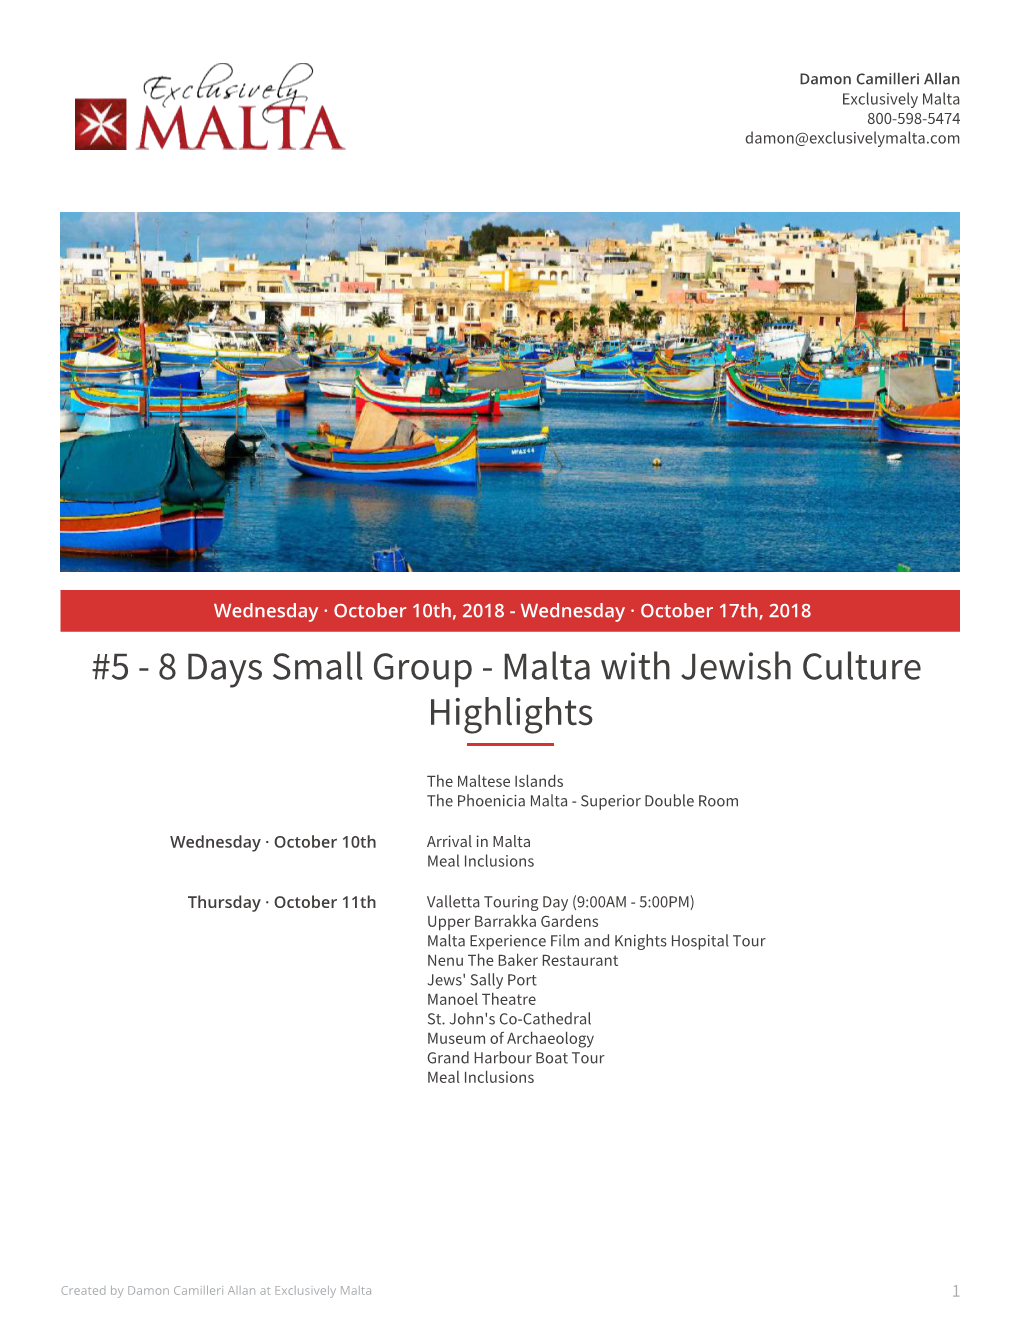 8 Days Small Group - Malta with Jewish Culture Highlights